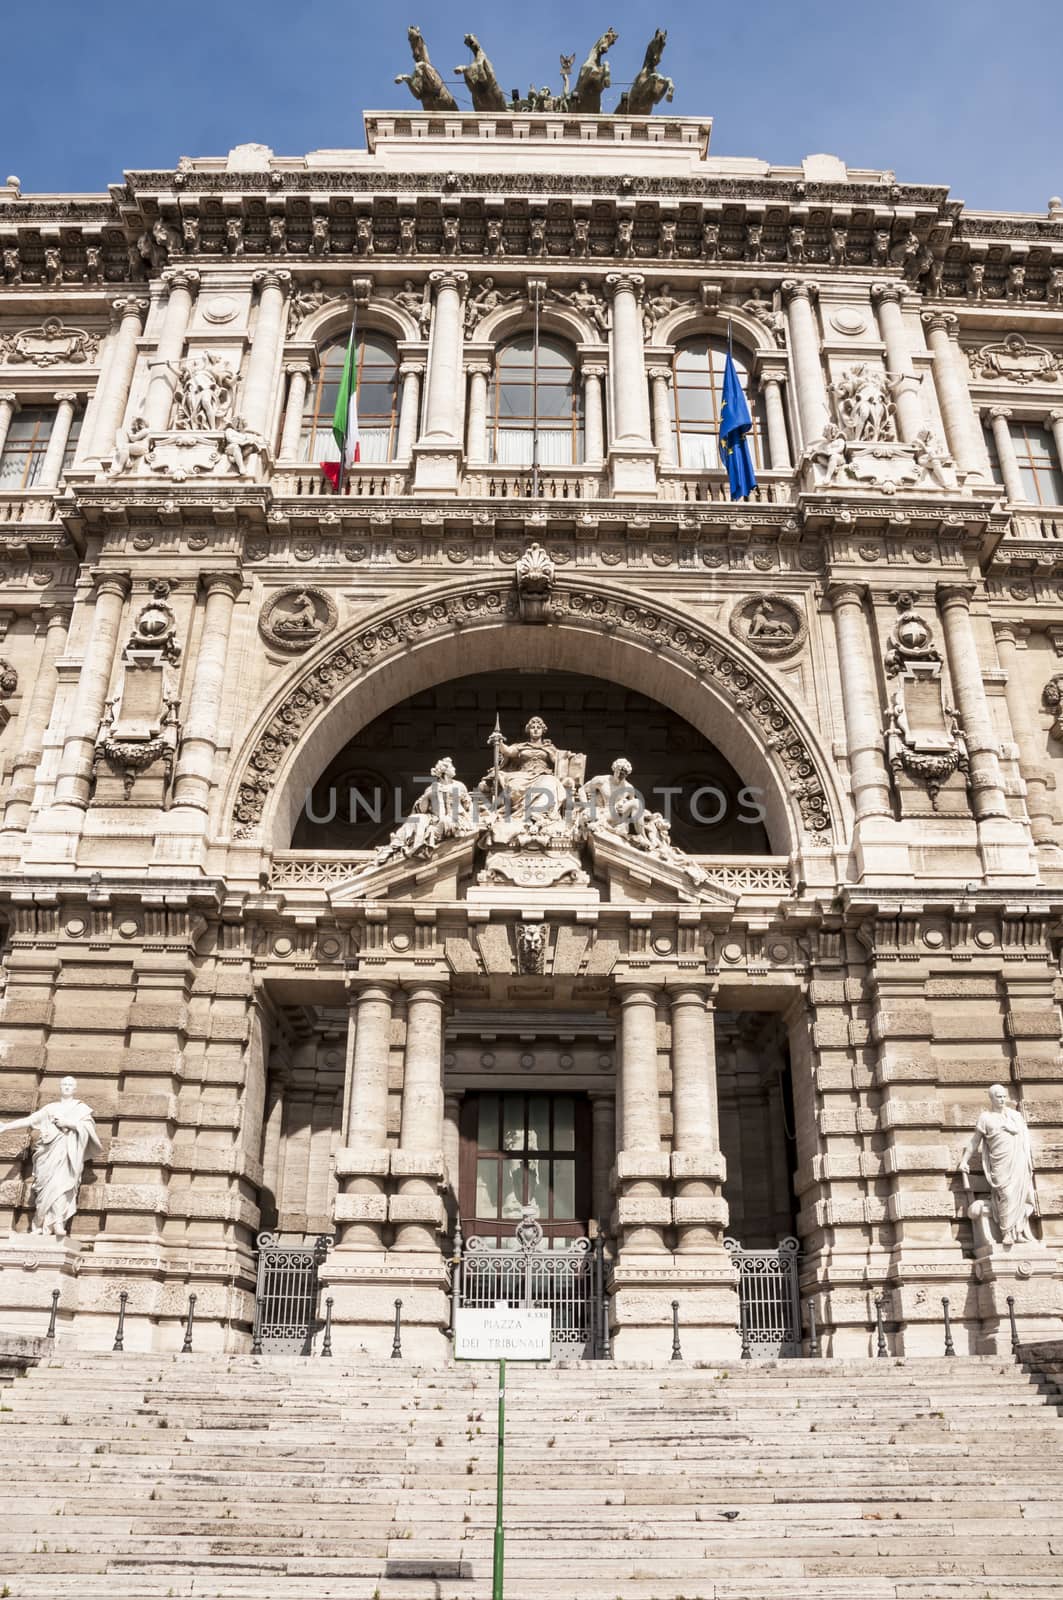 Palace of Justice in Rome, Italy by edella